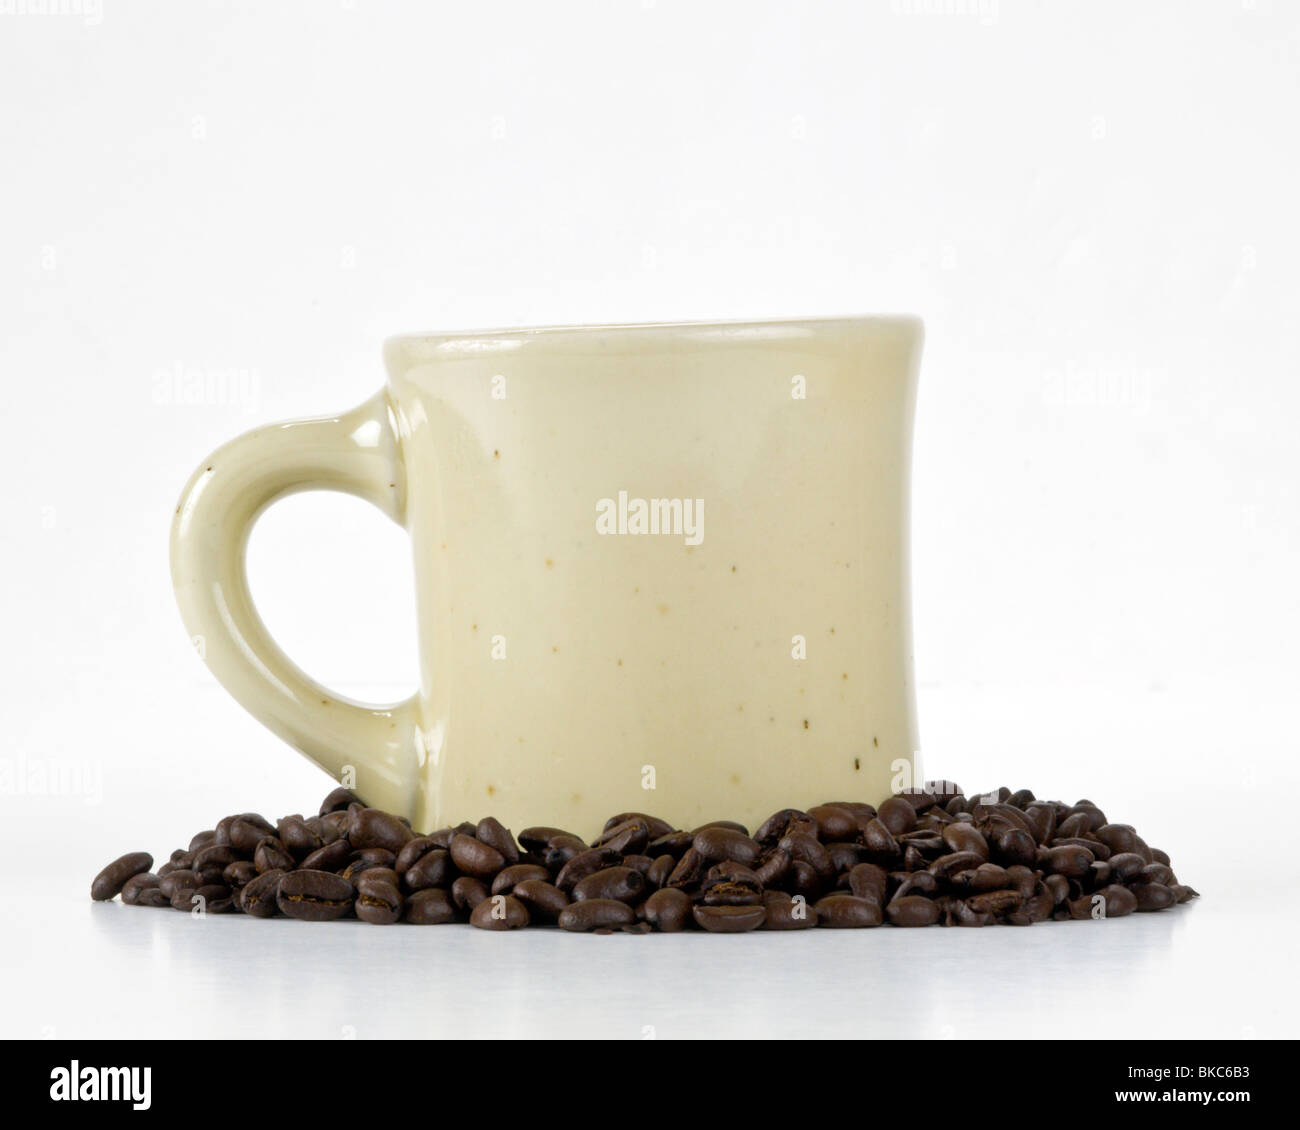 Iconic Coffee Mug in coffee beans on white background Stock Photo